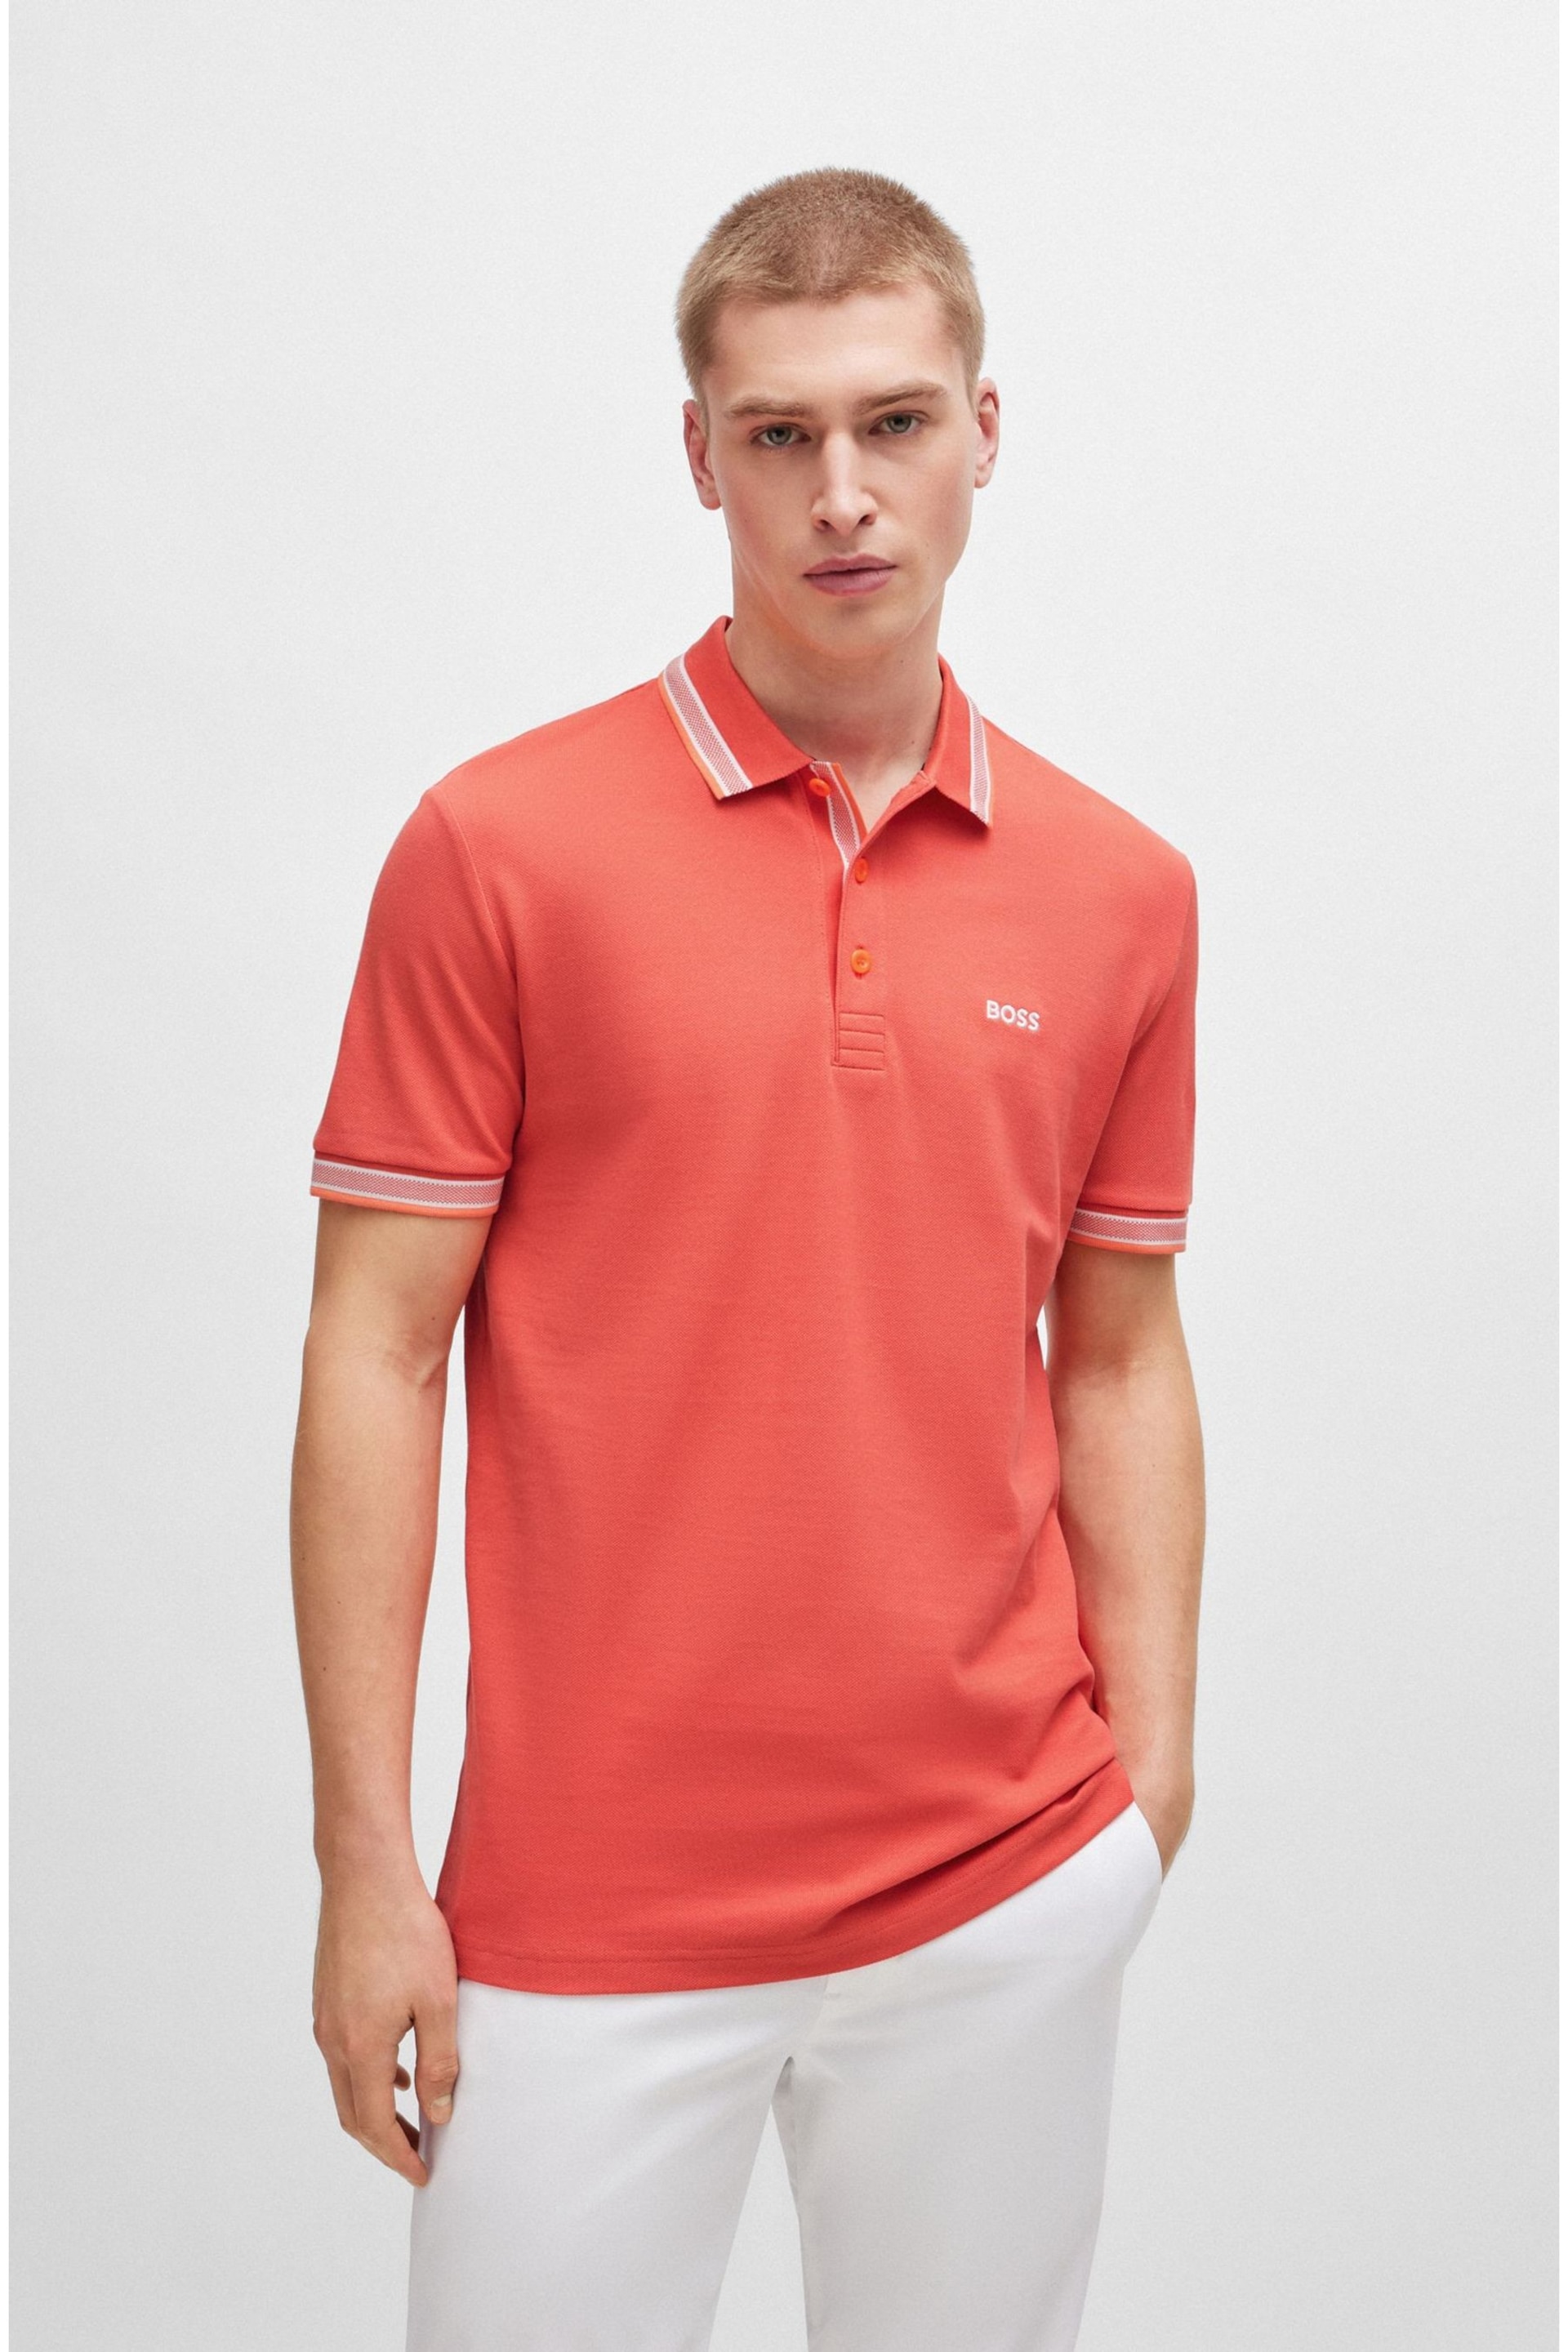 BOSS Dark Orange Cotton Polo Shirt With Contrast Logo Details - Image 2 of 5